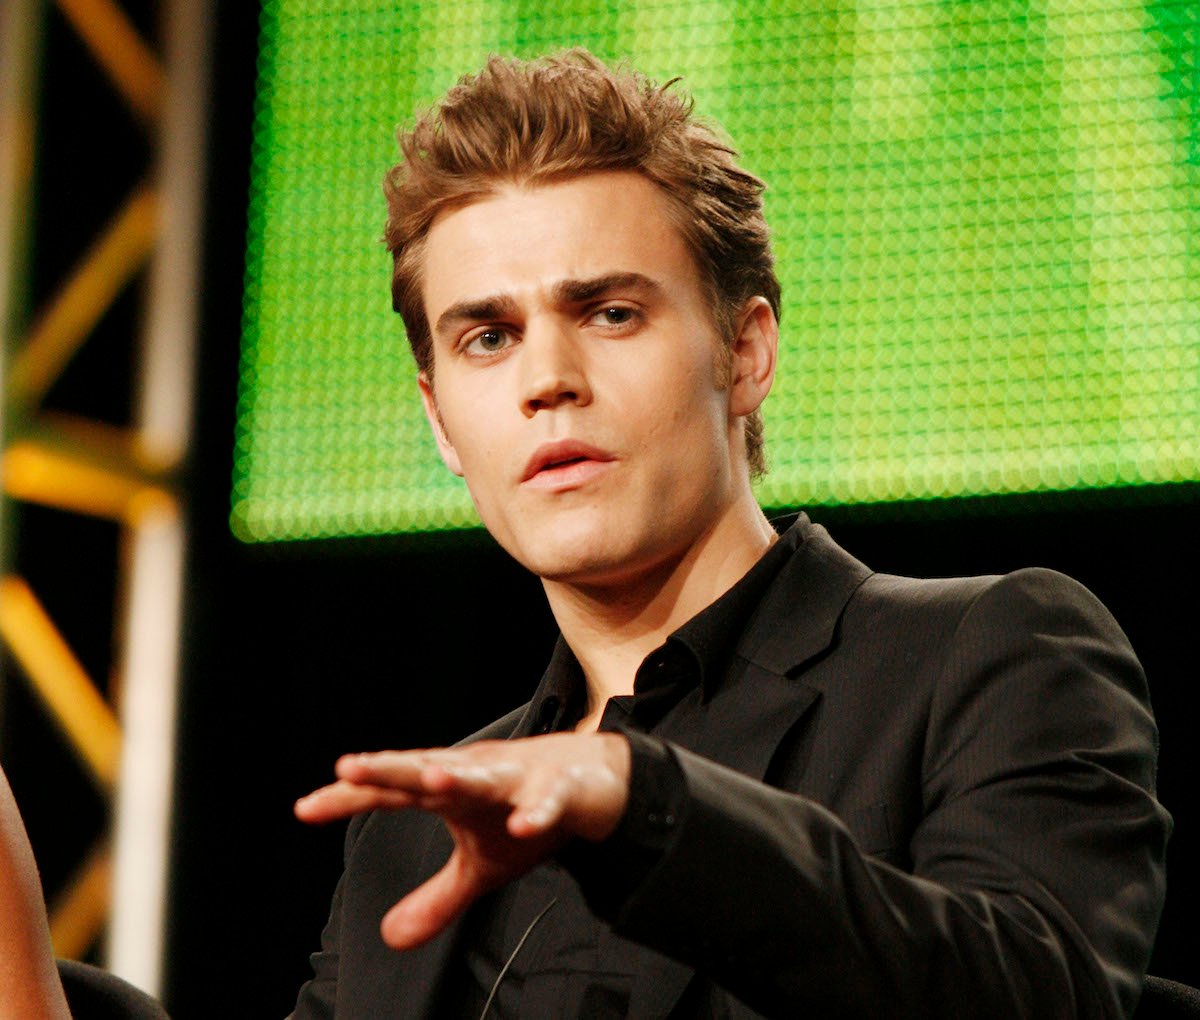 'Vampire Diaries' star Paul Wesley speaks of his obsession with Stefan on a TCA panel